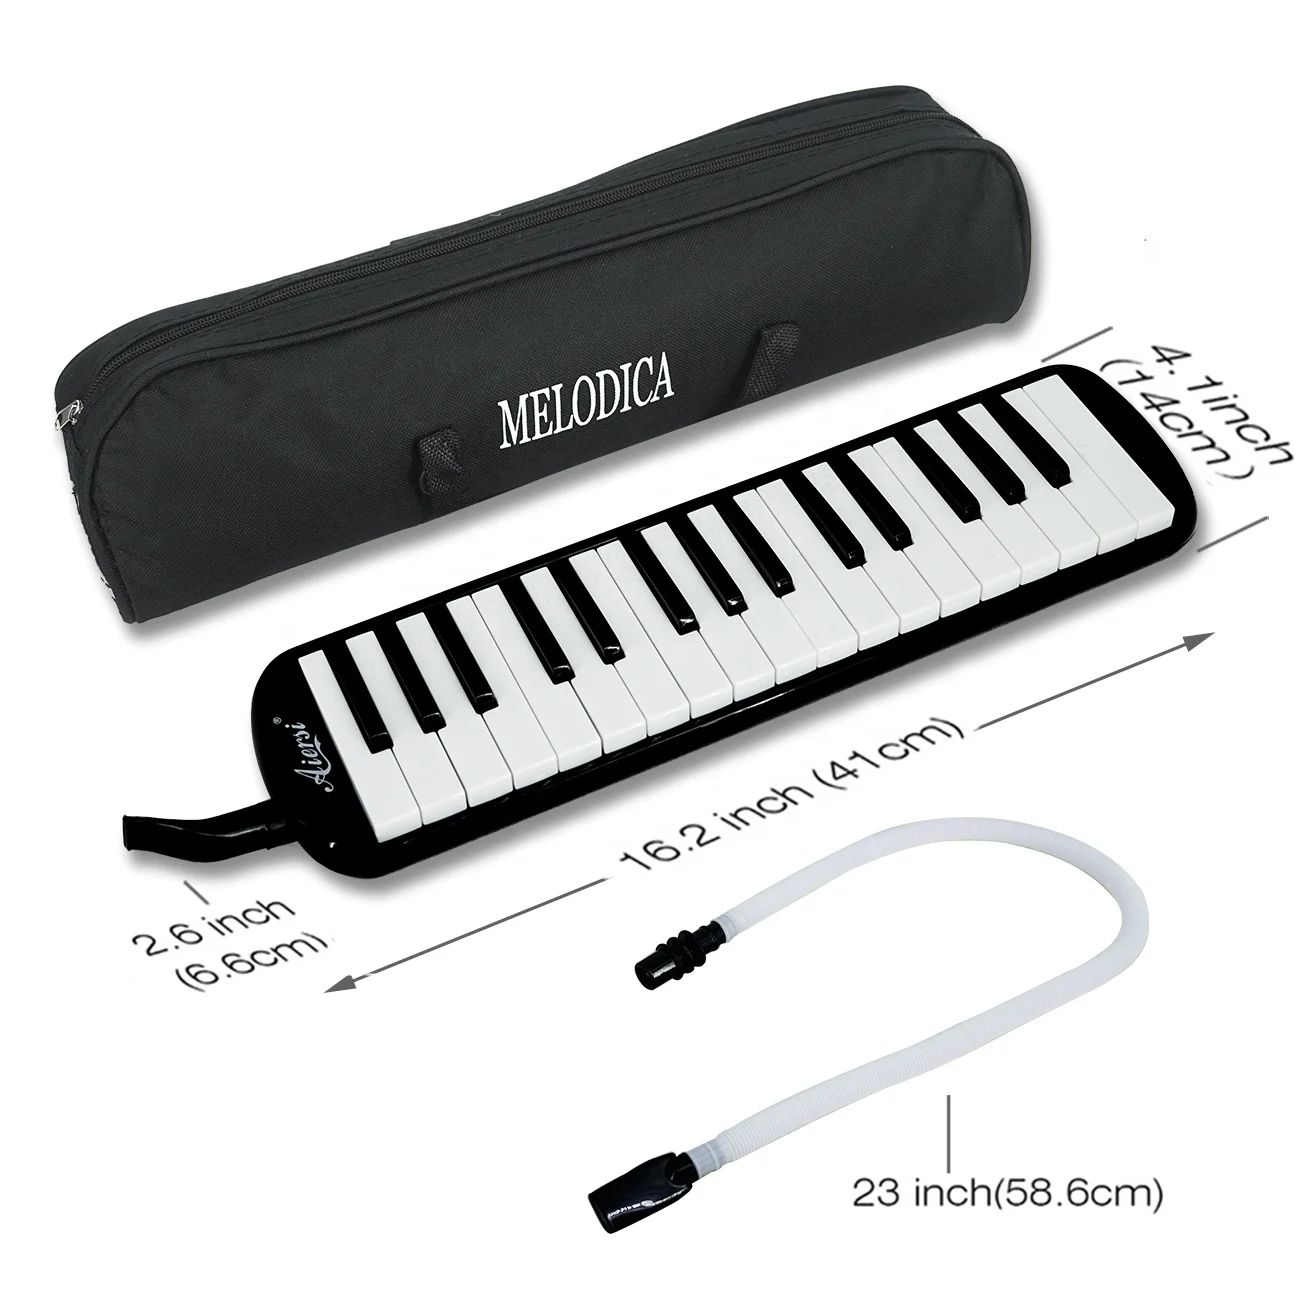 Aiersi brand Colourful 32 keys melodica Pianca keyboard musical instruments hot sale musical toys for kids